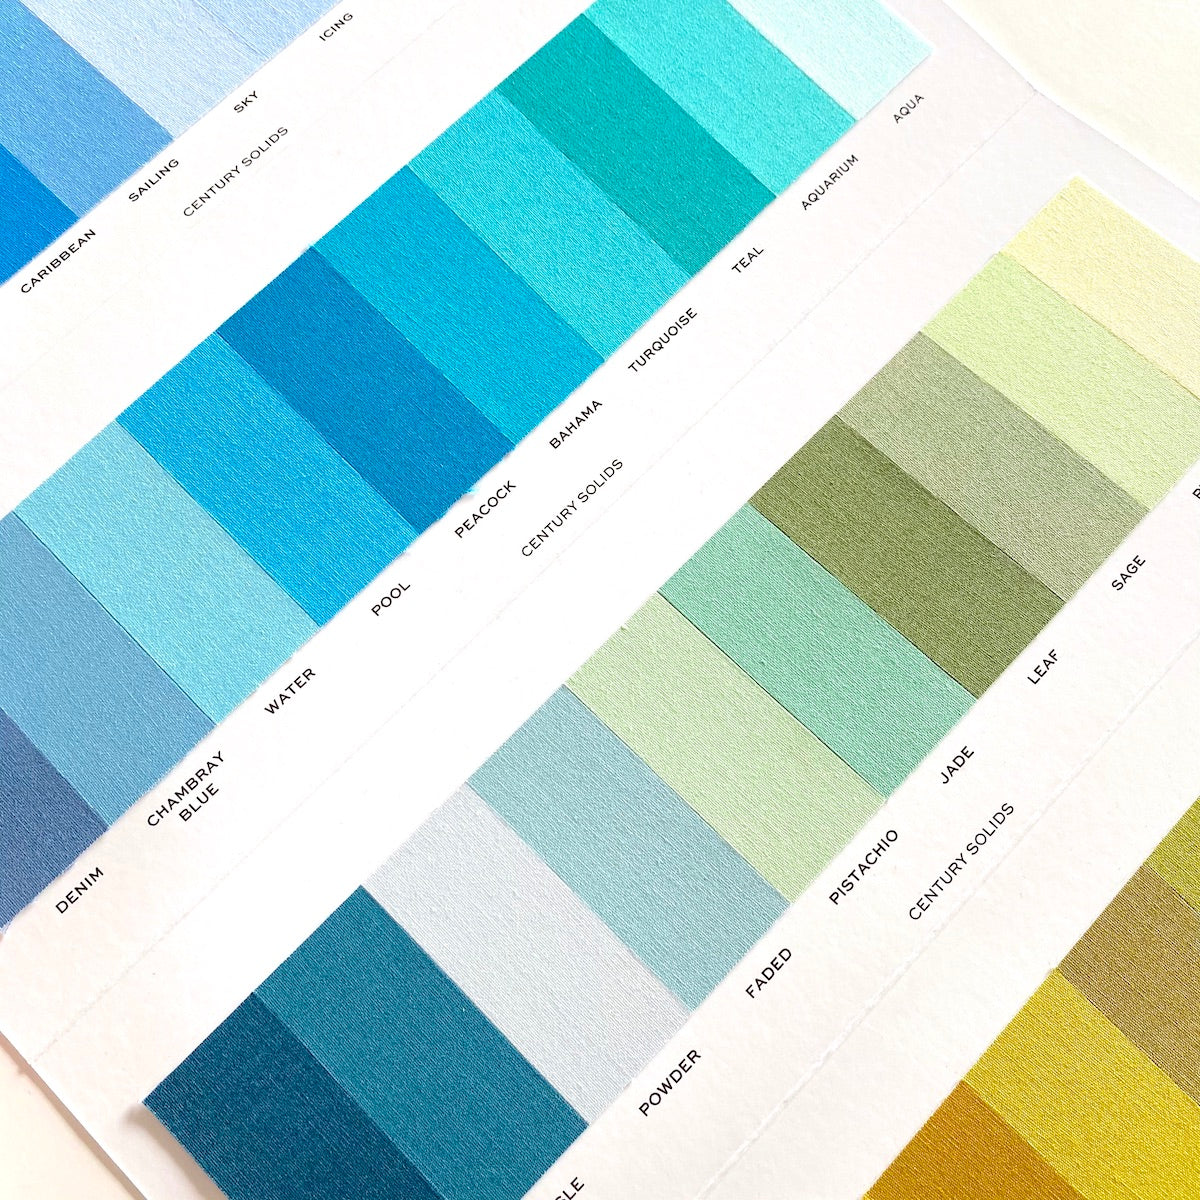 Century Solids Color Card by Andover Fabrics